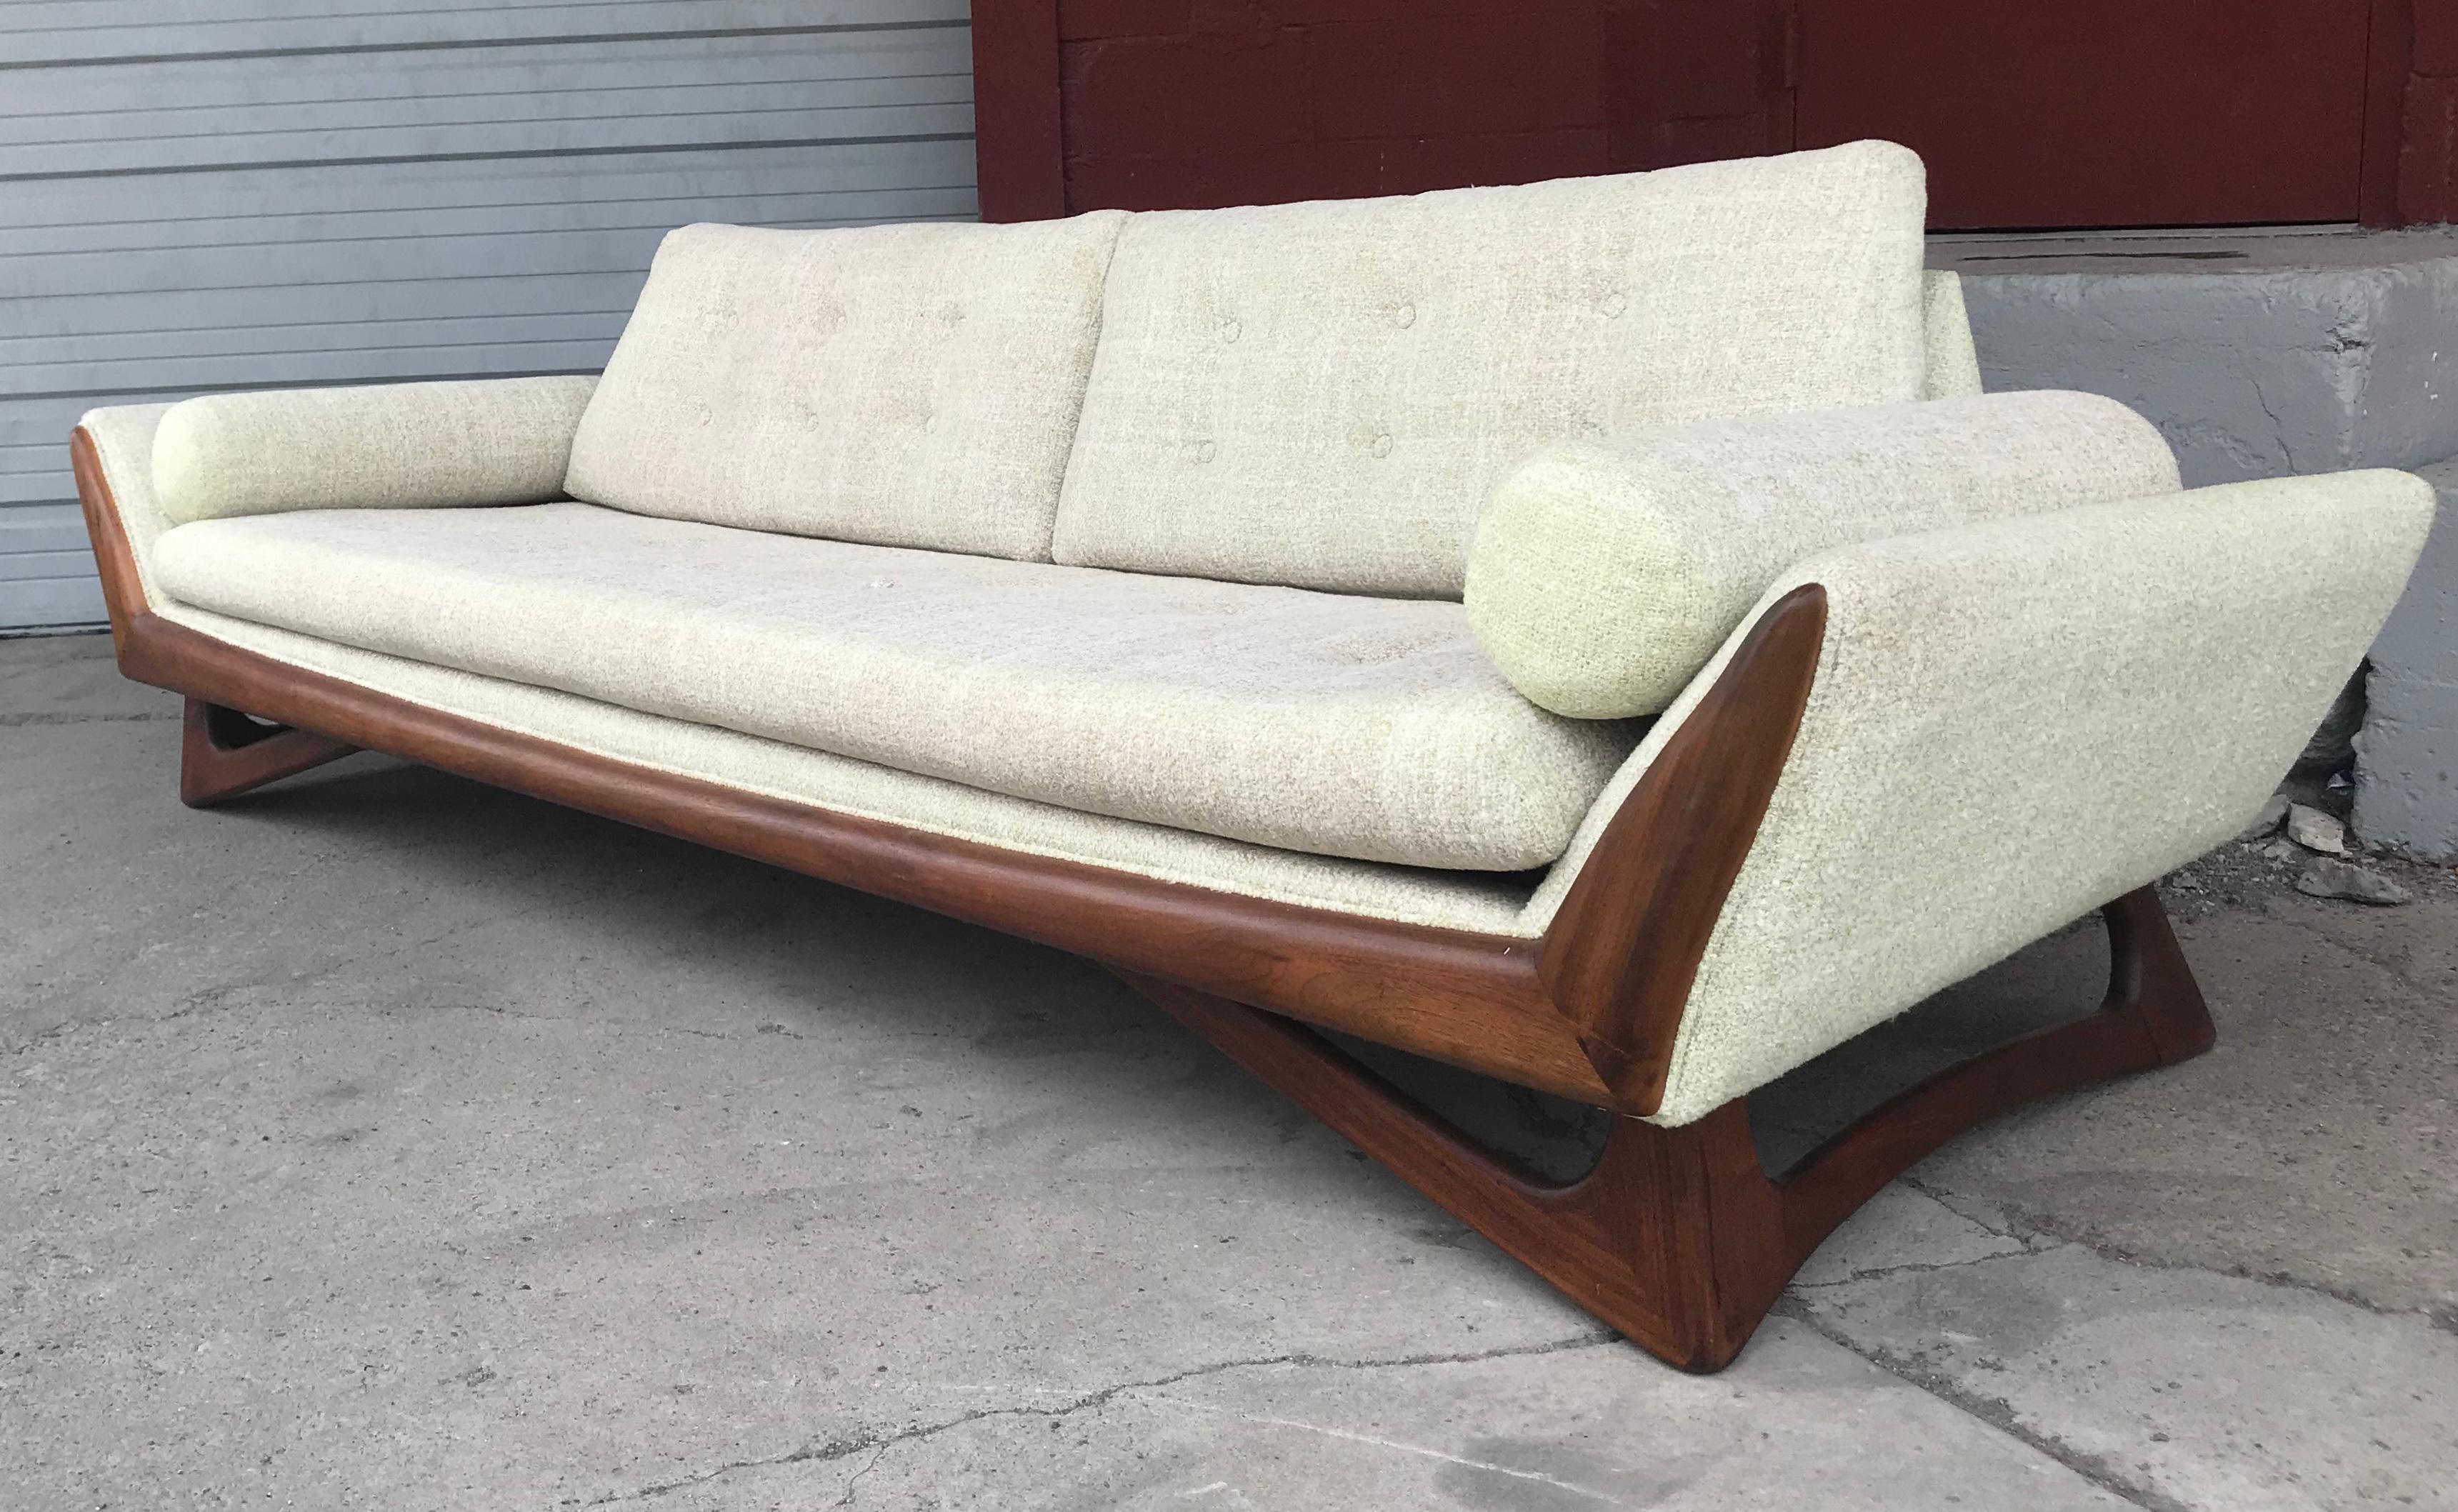 Classic Mid-Century Modern sofa designed by Adrian Pearsall, show-stopper! Stunning sculptural walnut wood base, off-white wool fabric, minor sun fading, sofa measuring 102